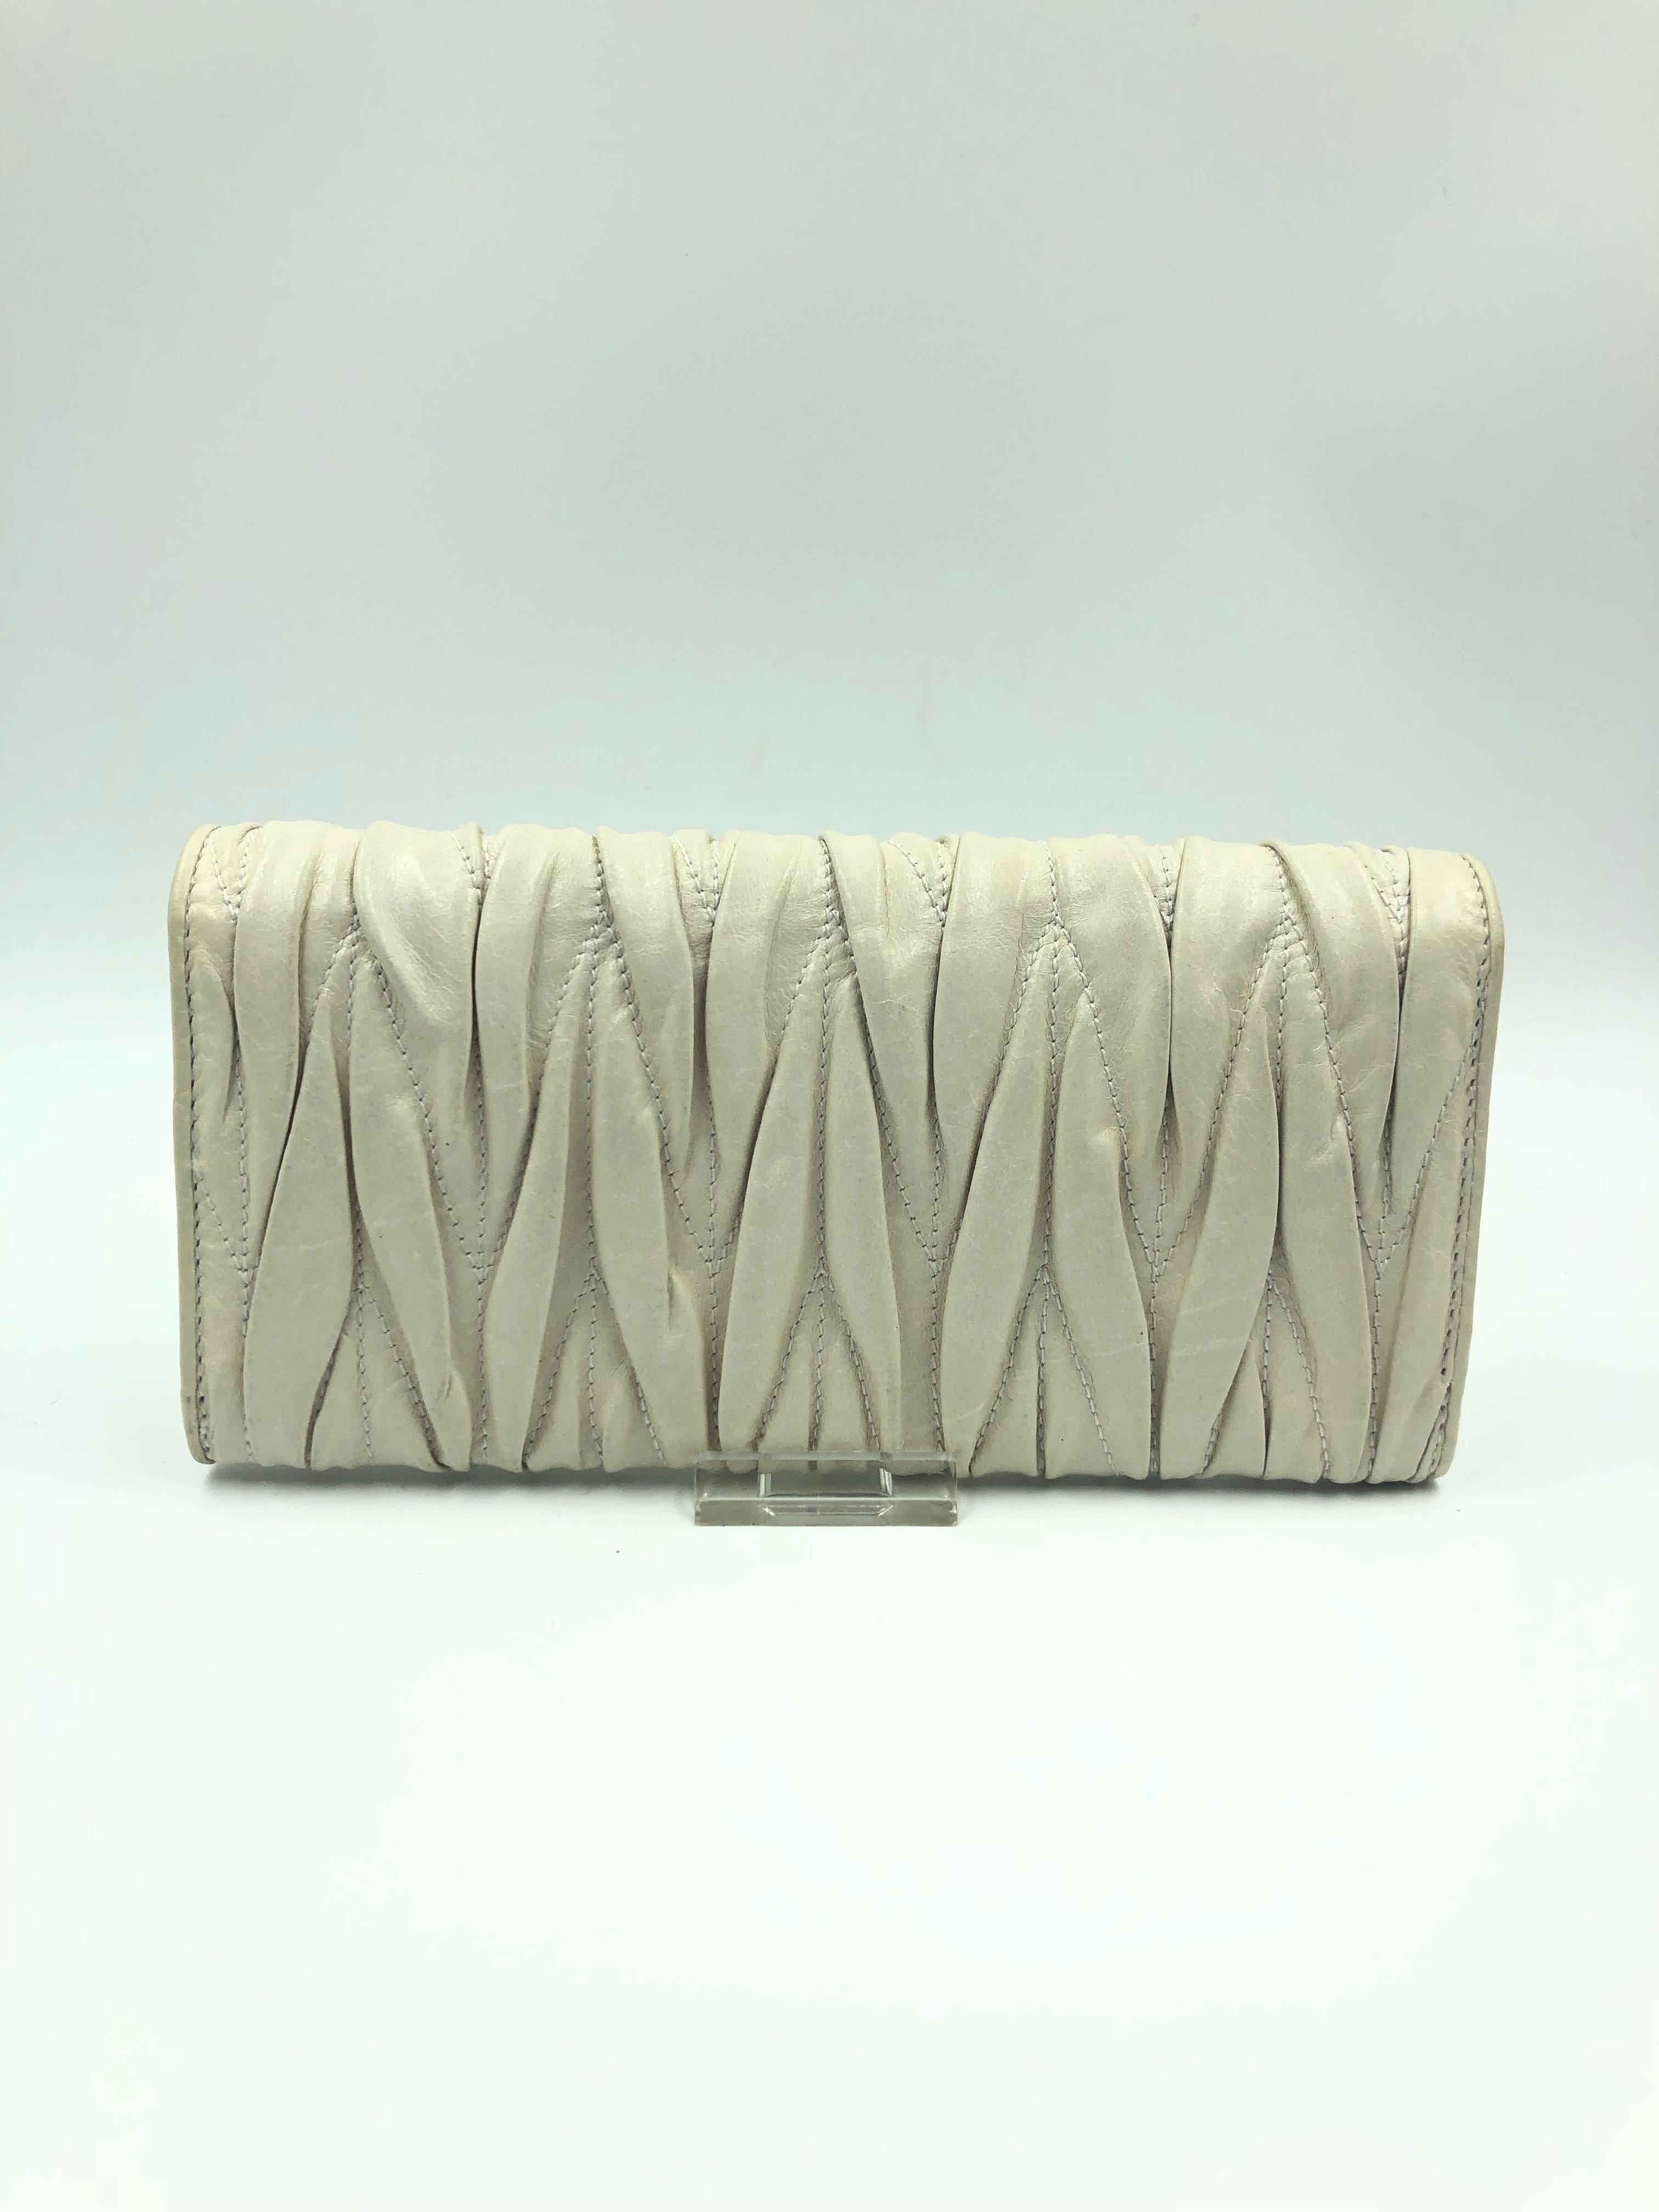 Miu Miu Ivory Matelassé Leather Lambskin Wallet. Signed Miu Miu in gold metal letters on top flap. Middle zipper compartment for change. Wallet comes with original box. Wallet shows no signs of use.
7.5